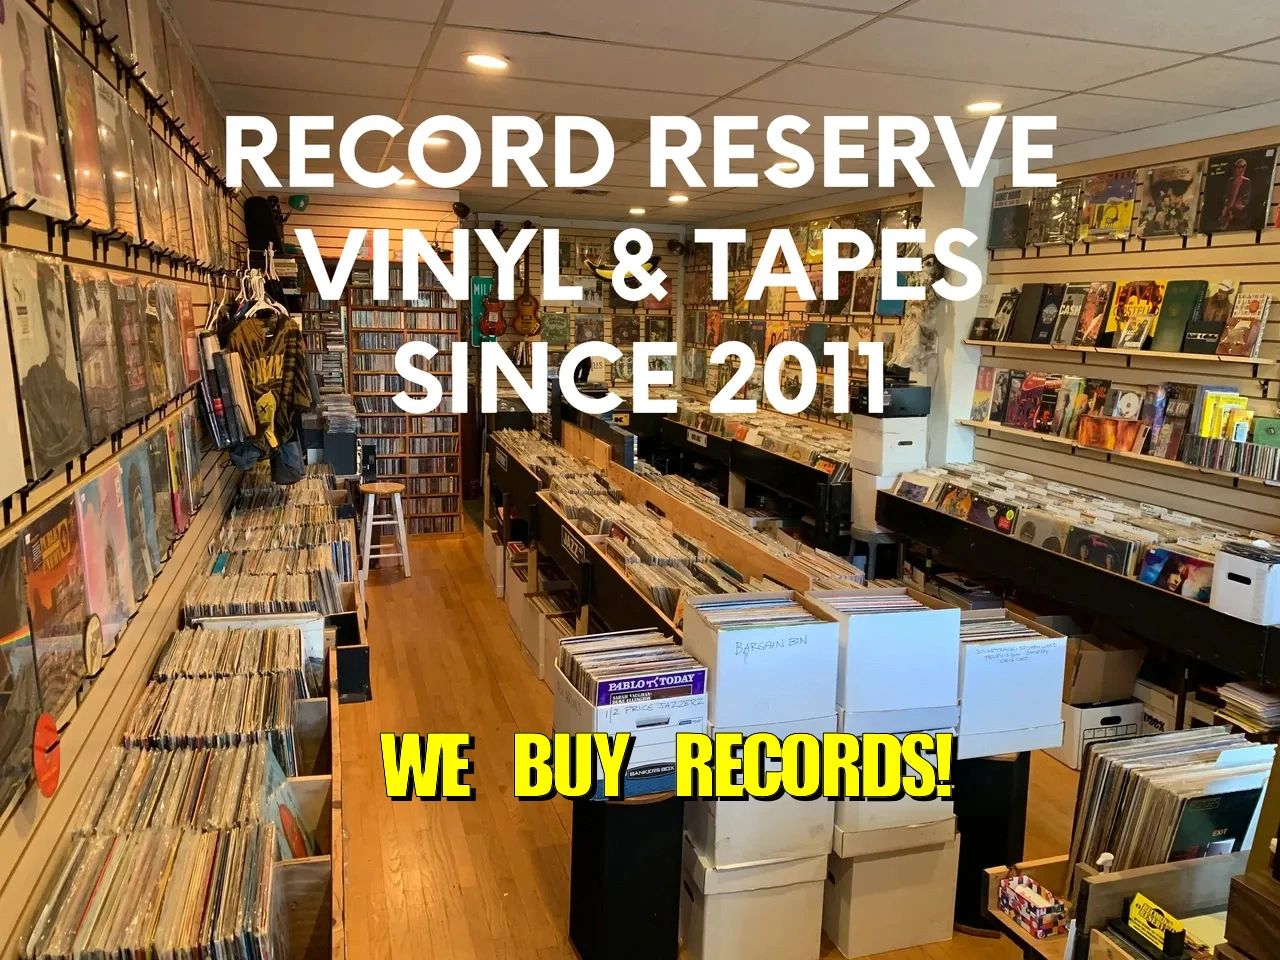 10 Things to Look for When Buying Vinyl